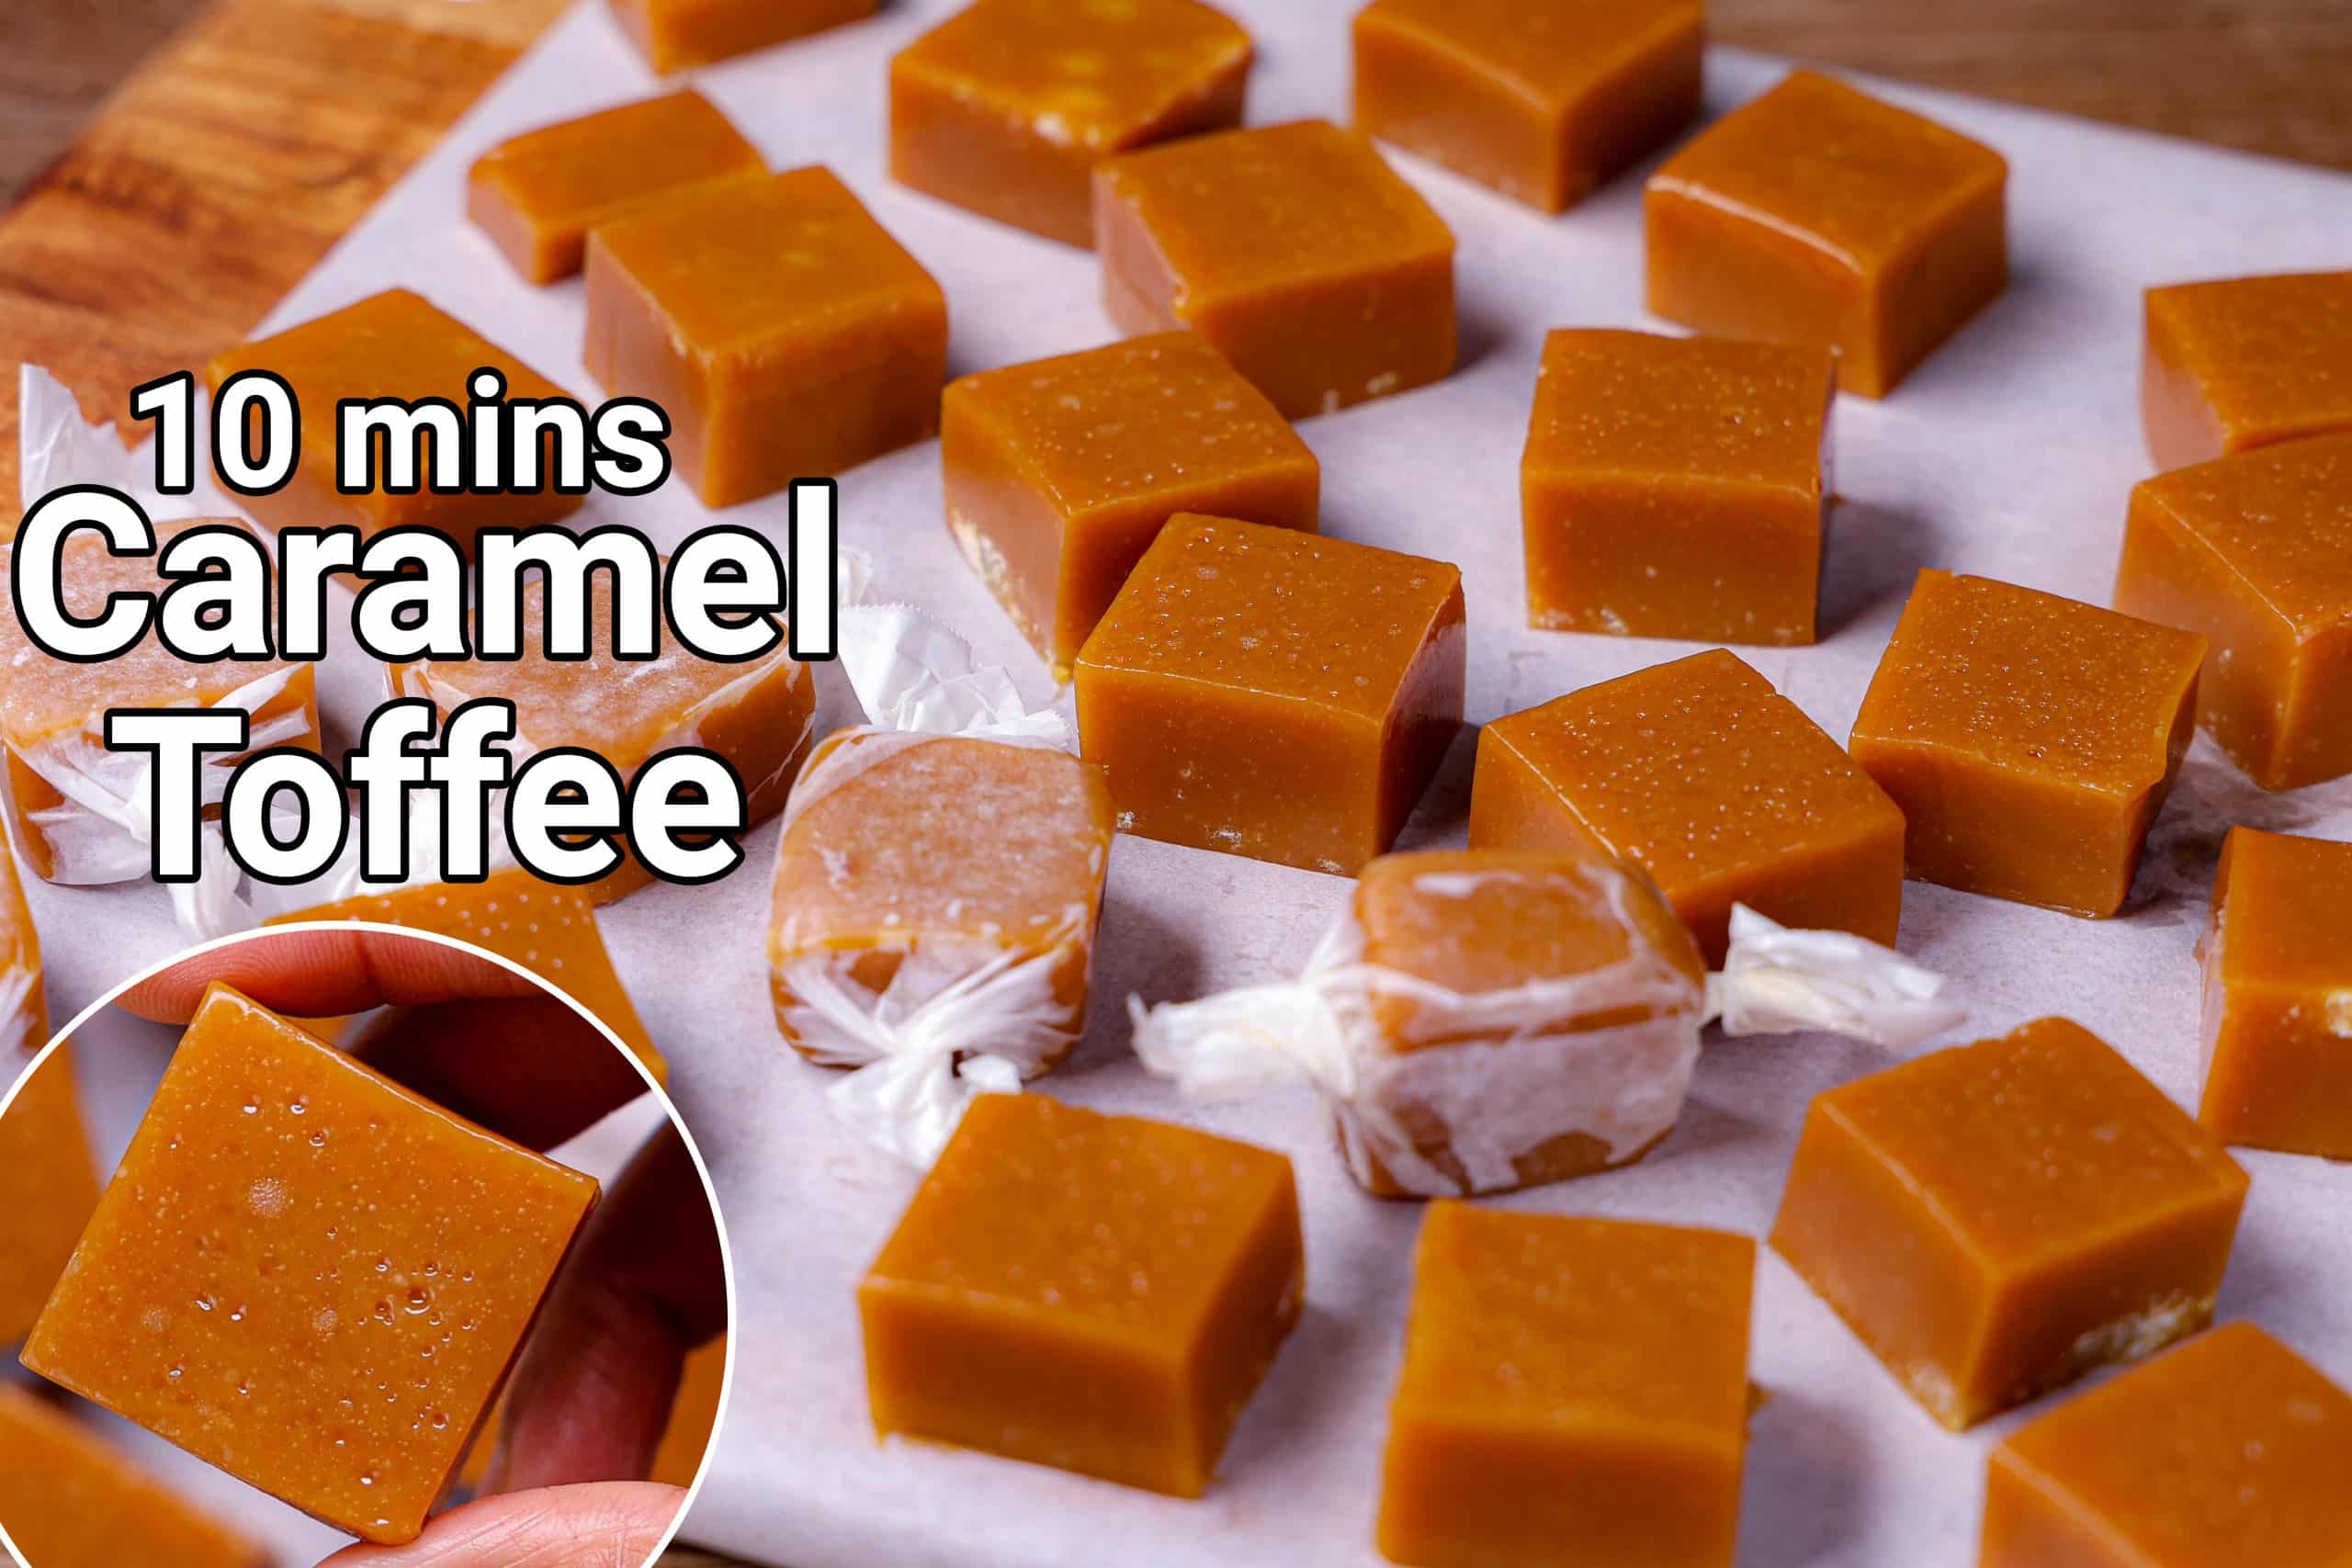 https://hebbarskitchen.com/wp-content/uploads/2022/01/caramel-toffee-recipe-caramel-candy-how-to-make-chewy-caramels-1-scaled.jpeg